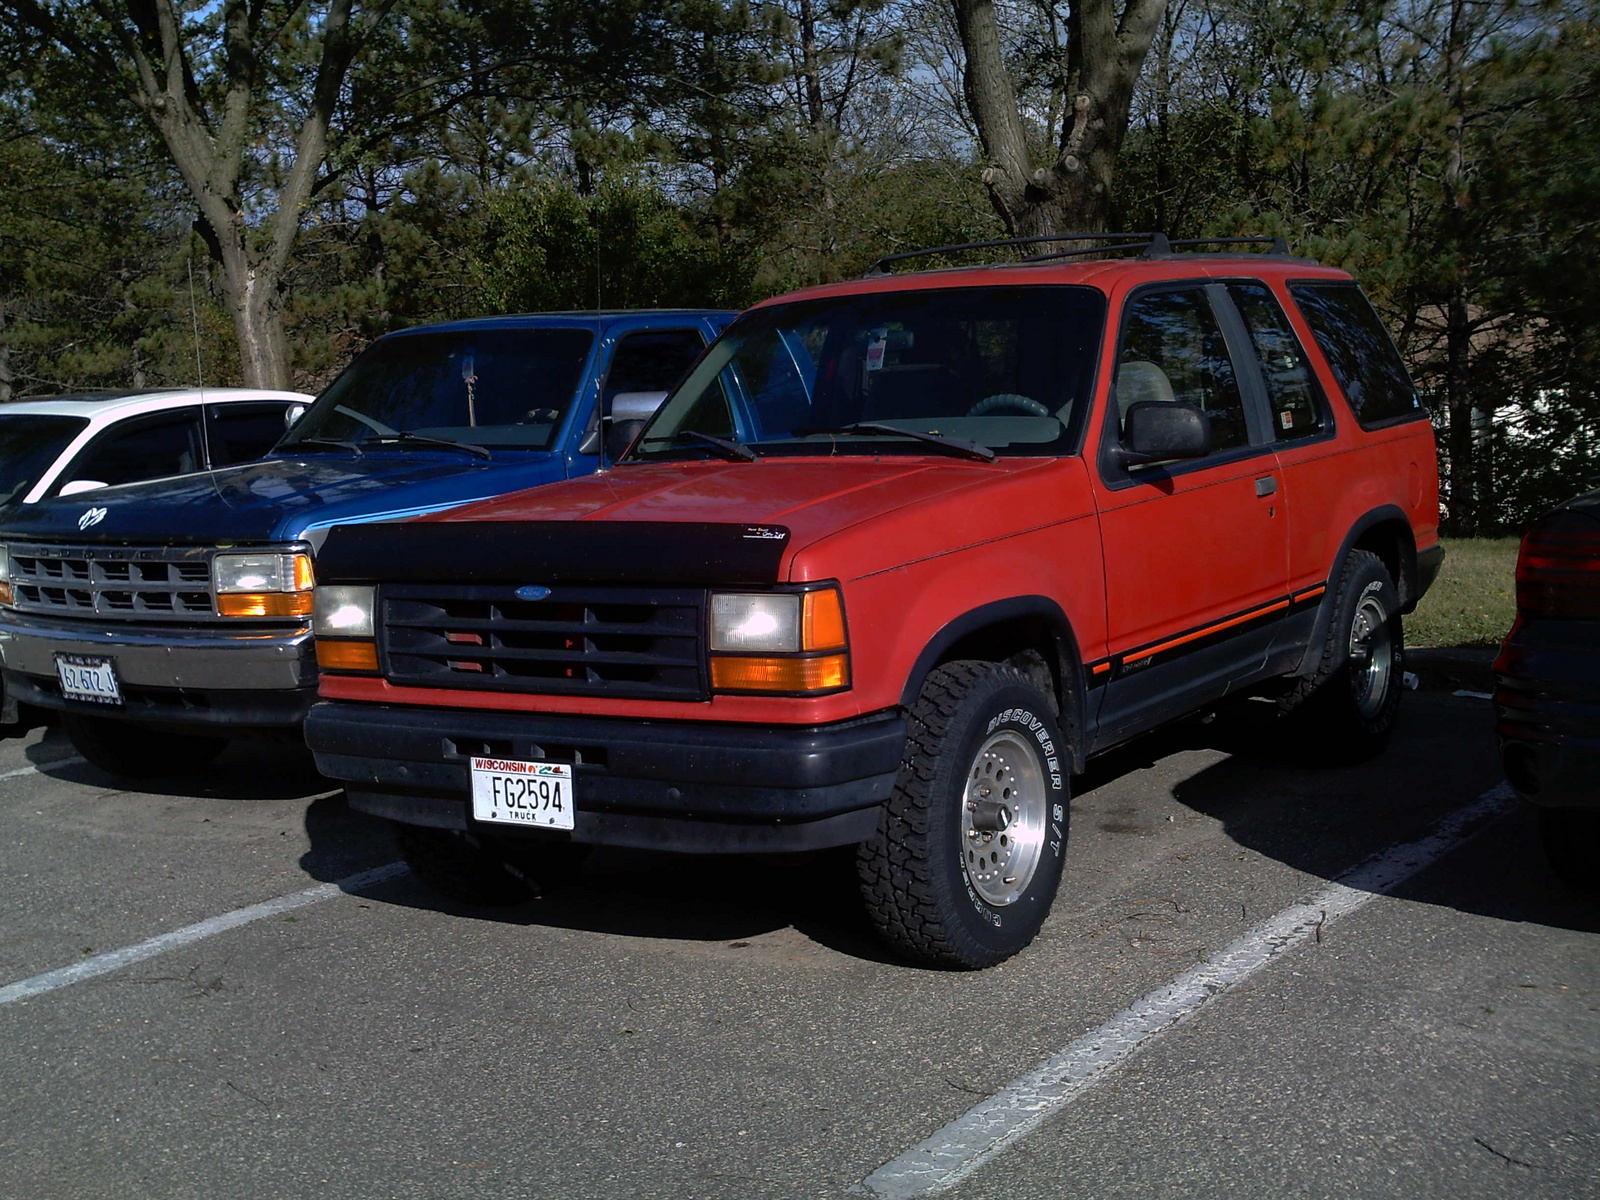 1991 Ford explorer xlt picture #8